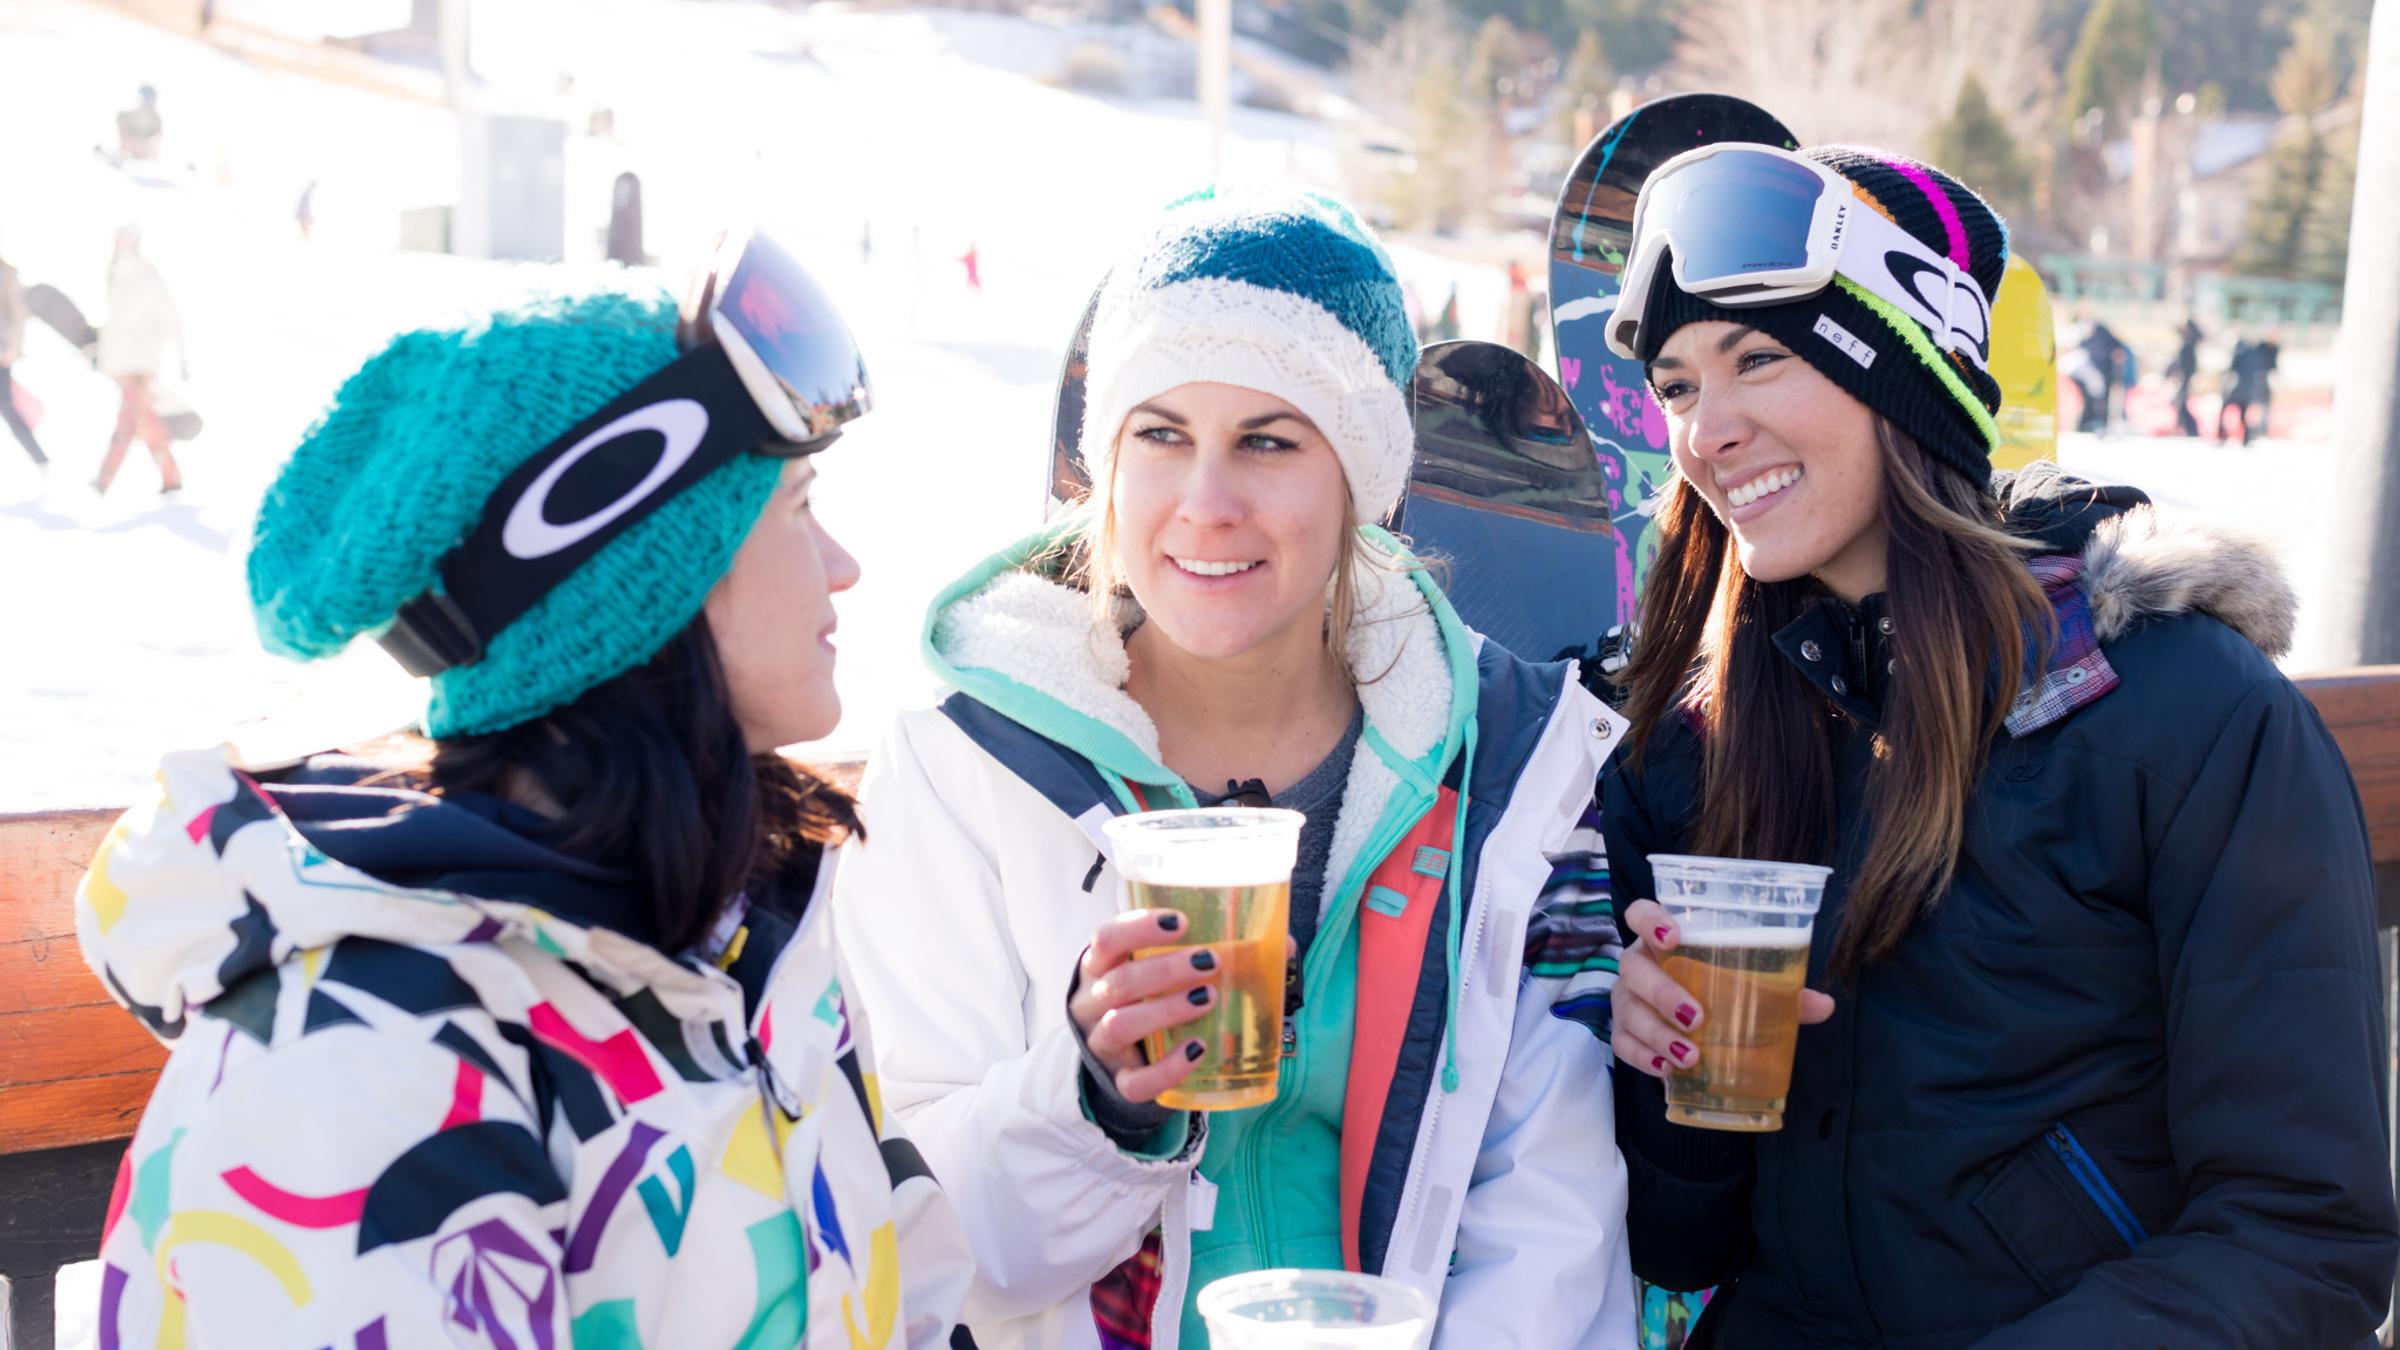 Three women drinking beer next to the ski hill